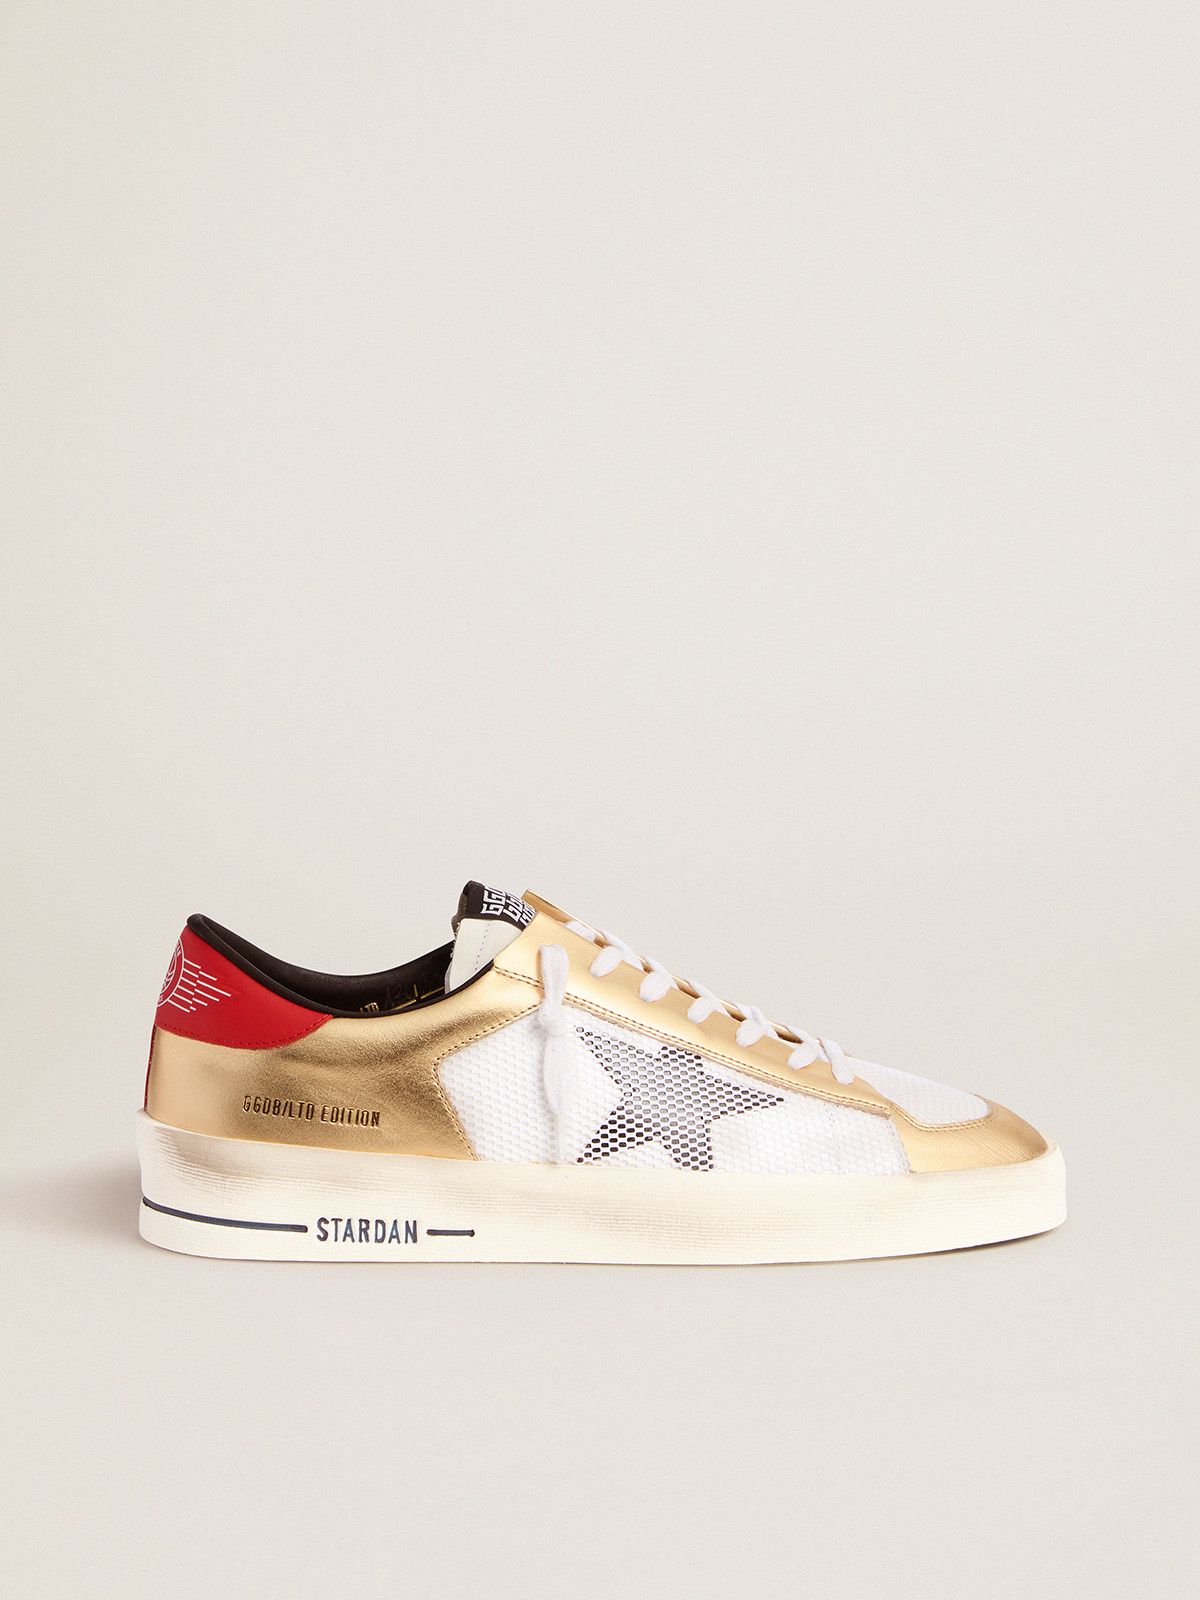 Golden Goose Saldi Uomo Women's Limited Edition Stardan sneakers with gold inserts